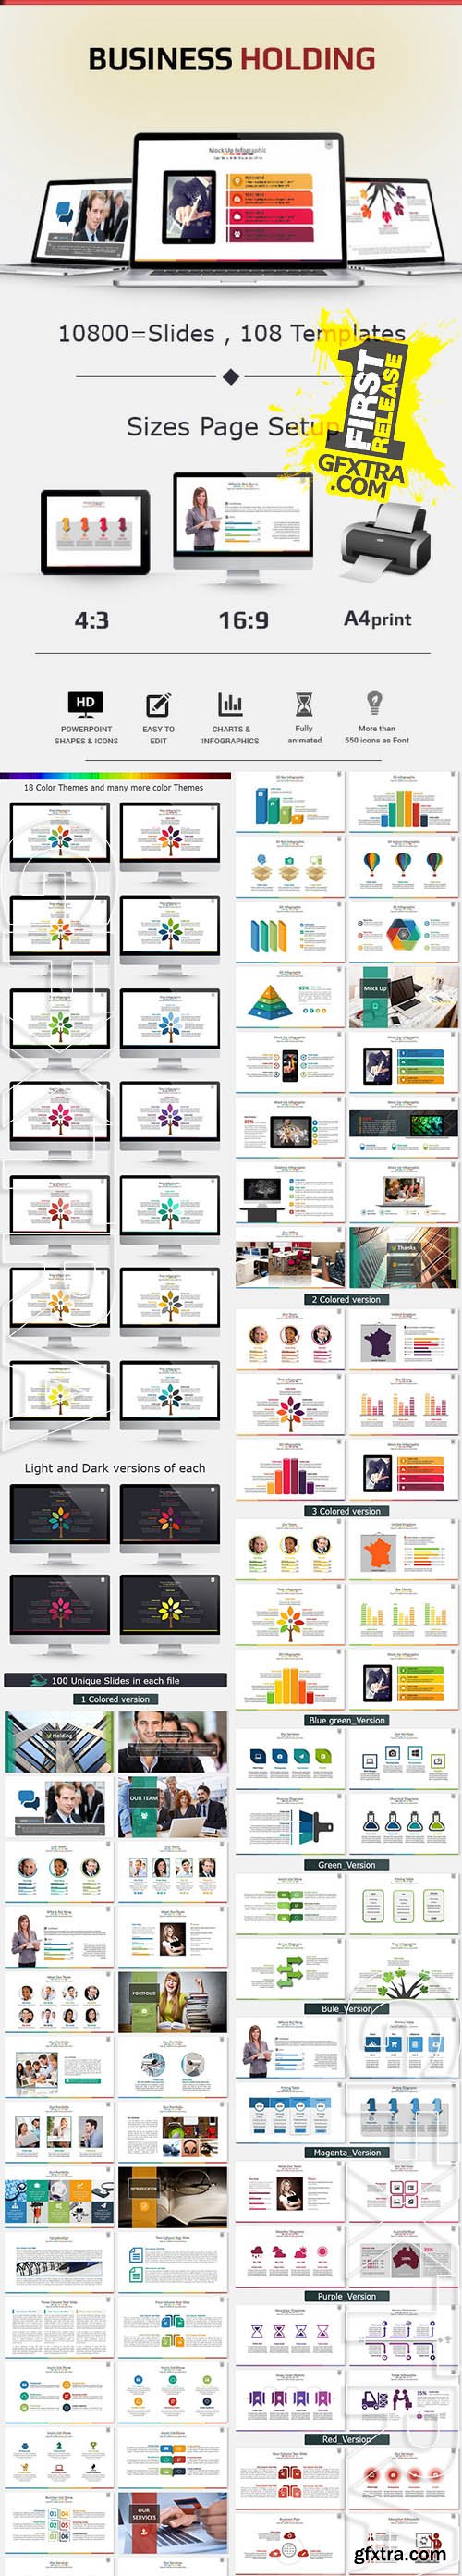 Business Holding Presentation Template - GraphicRiver 11168856